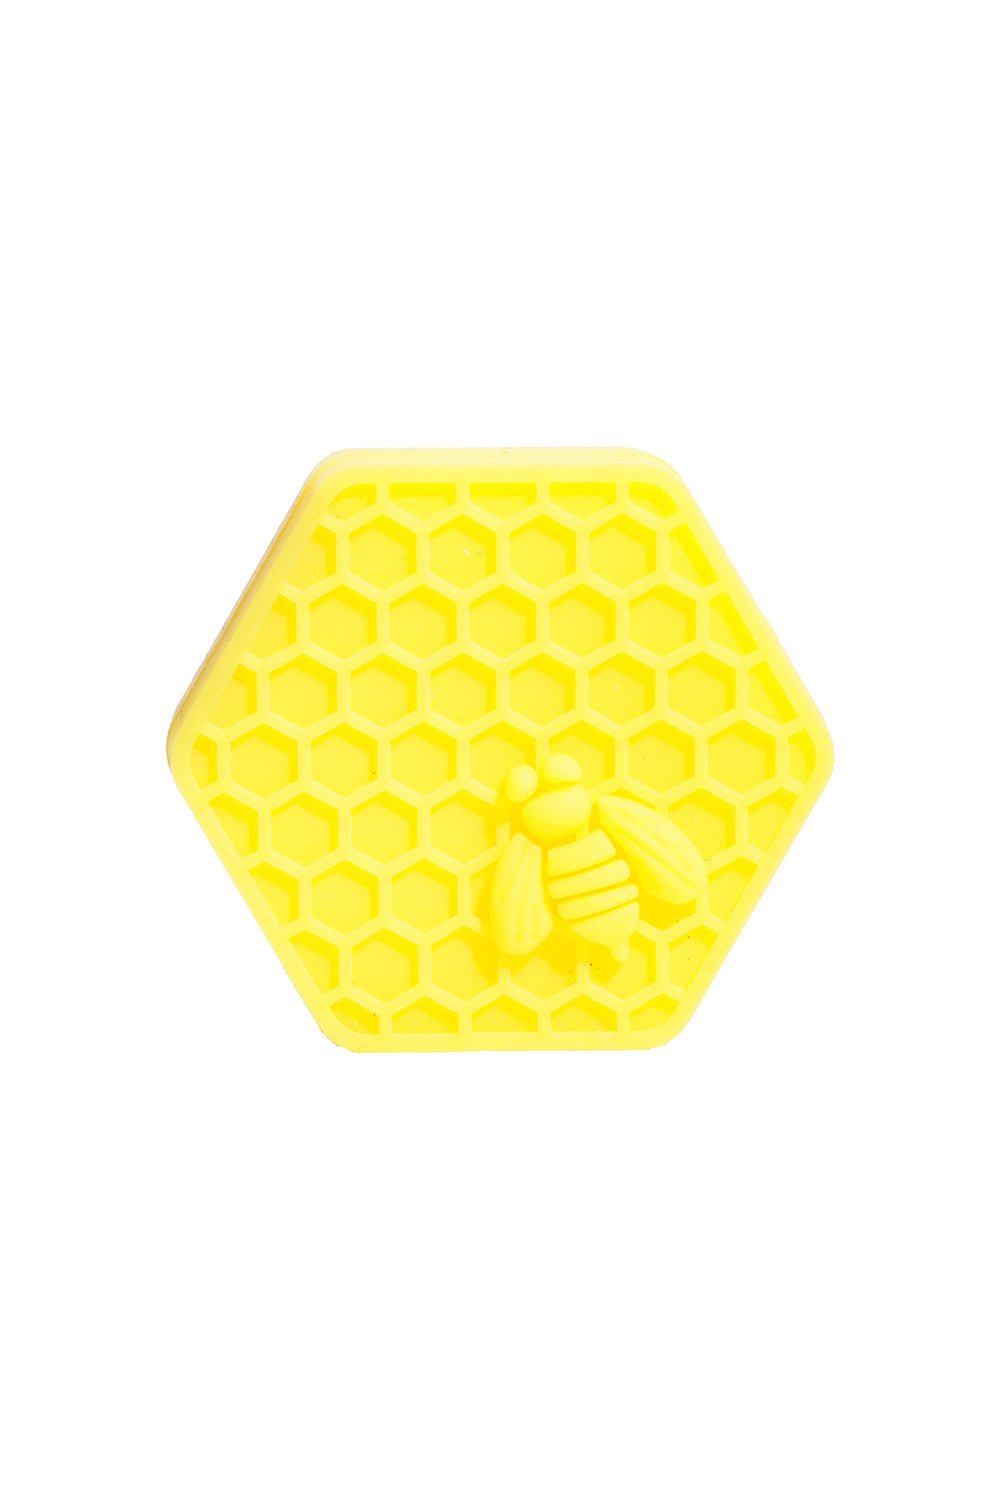 Silicon Container Honey Comb | Stogz | Find Your High